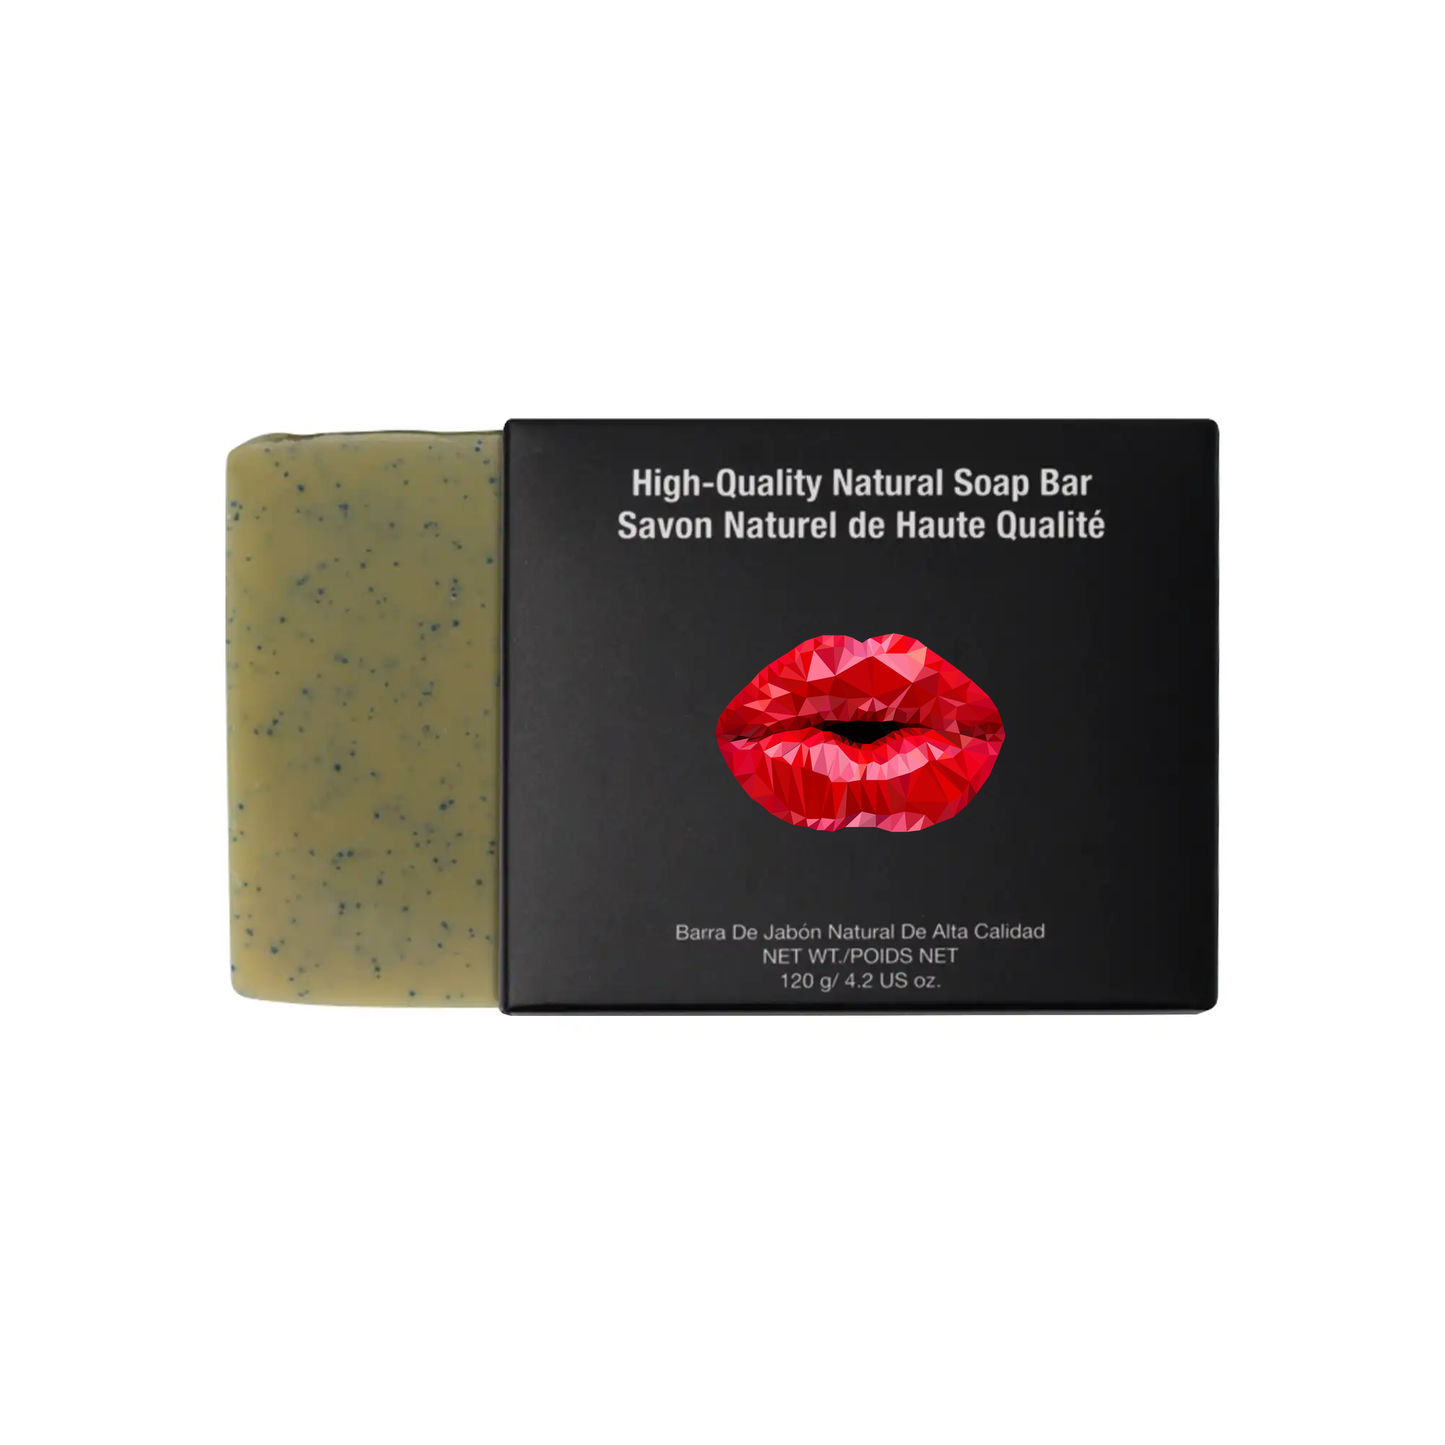 "Lather, Rinse, On Repeats" Natural Sunflower Goddess Soap